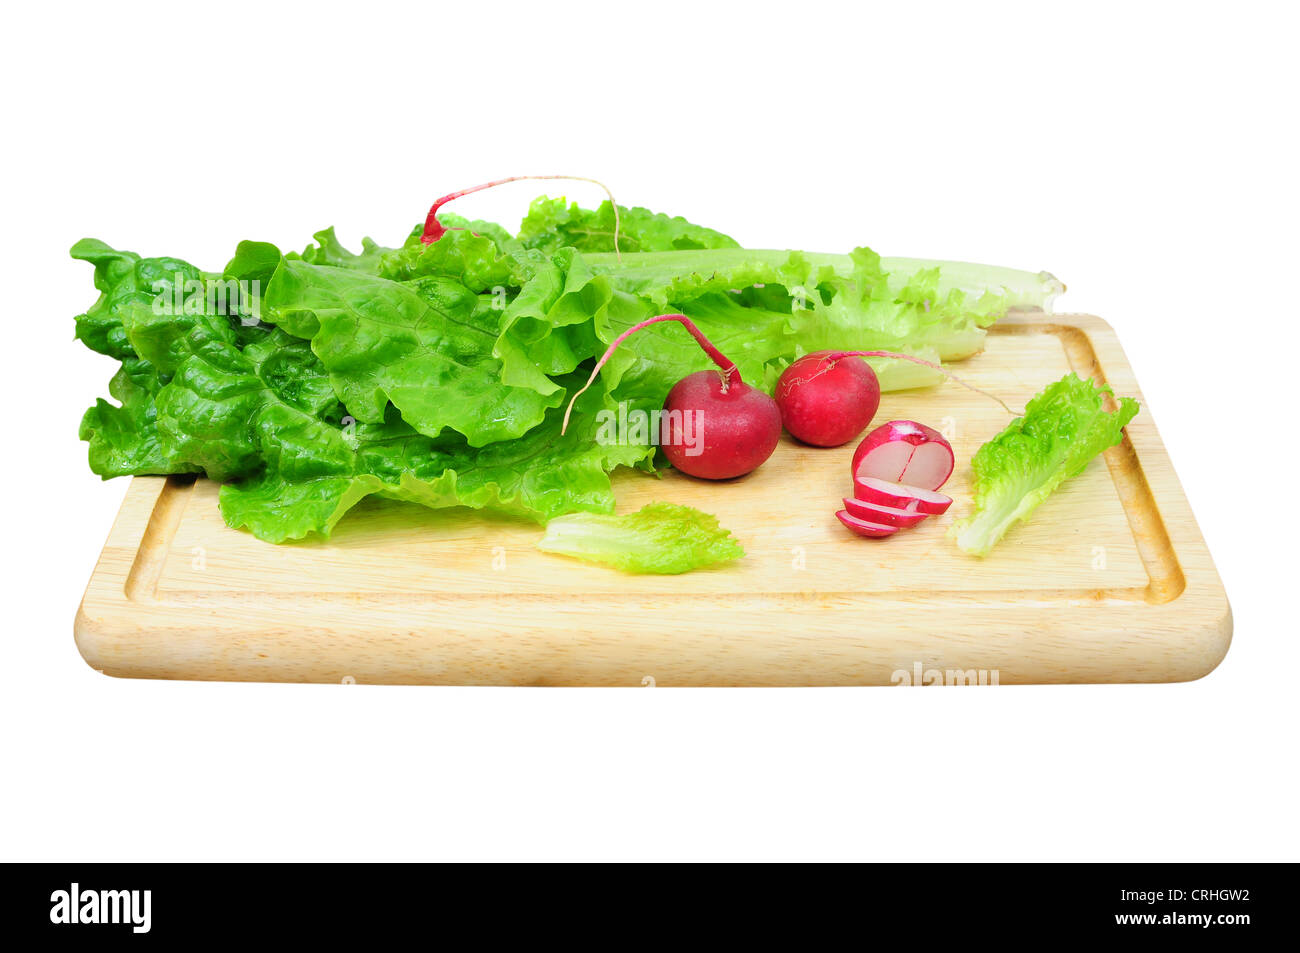 Raw pork steak and lettuce leaf on wooden board, isolated Stock Photo